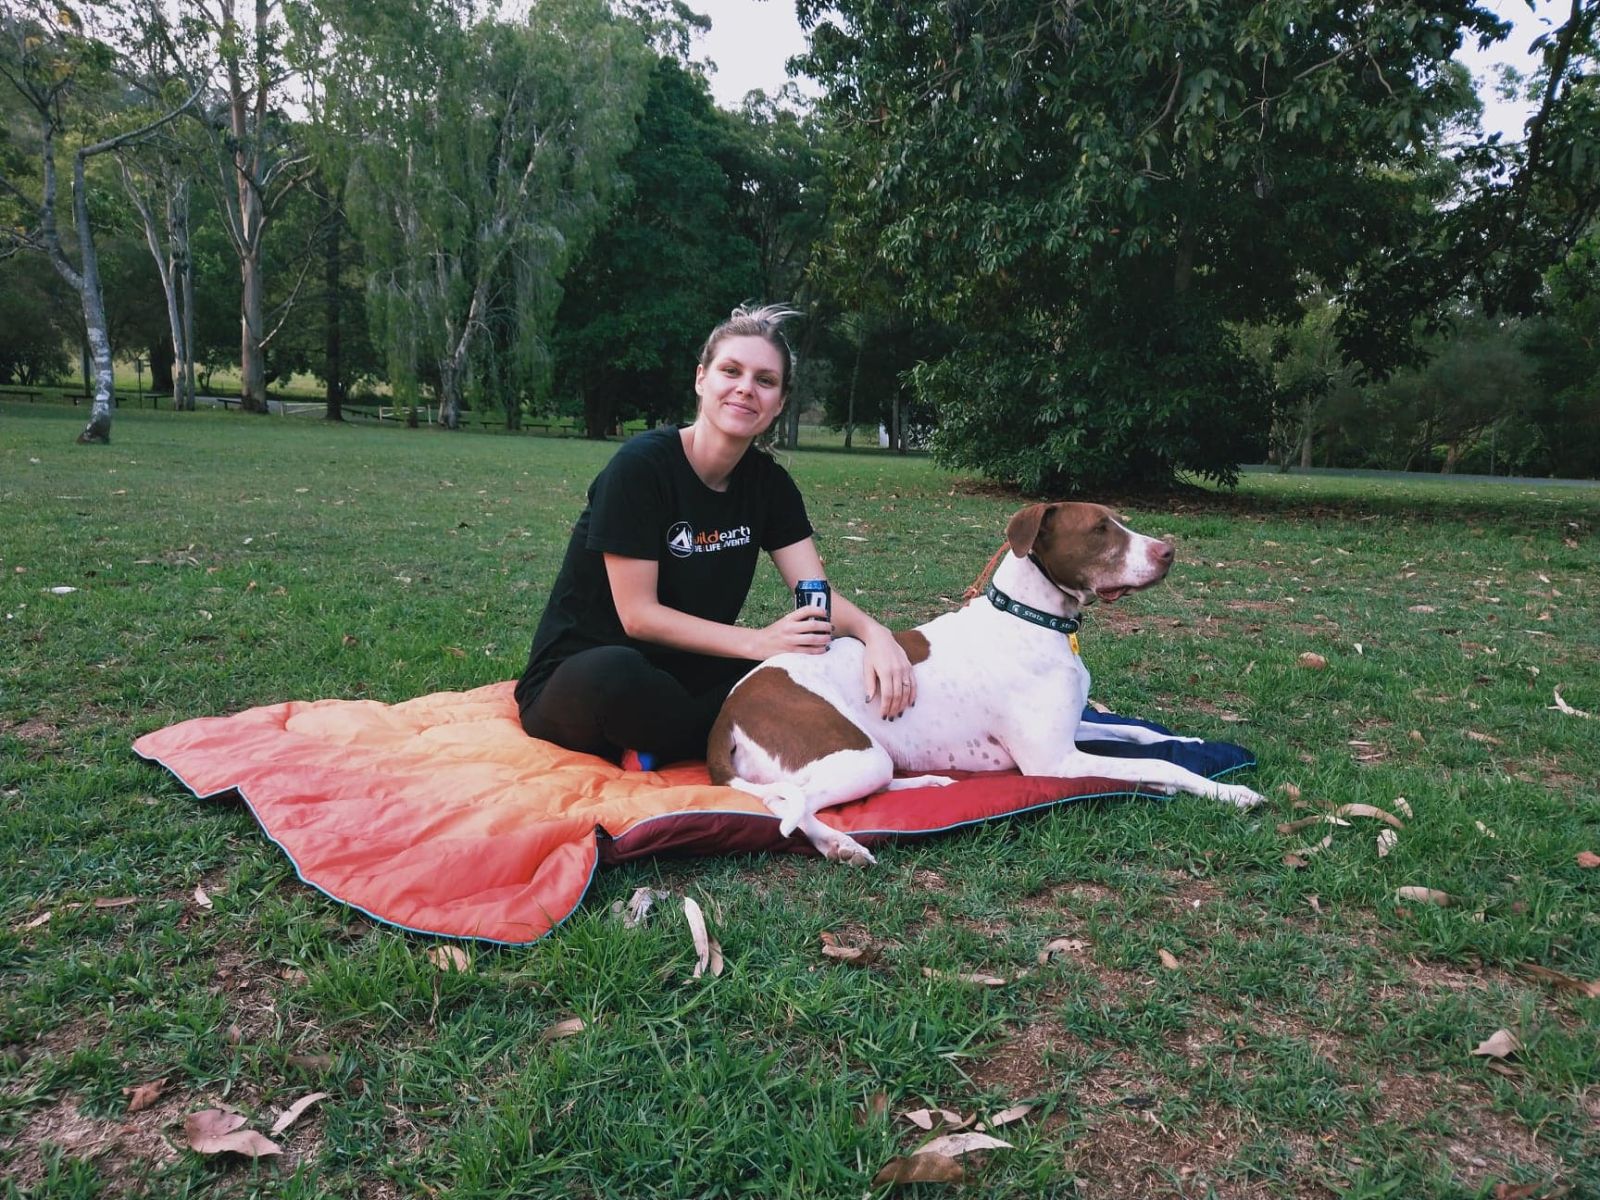 Abby sitting on an orange picnic blanket with her dog, Gus